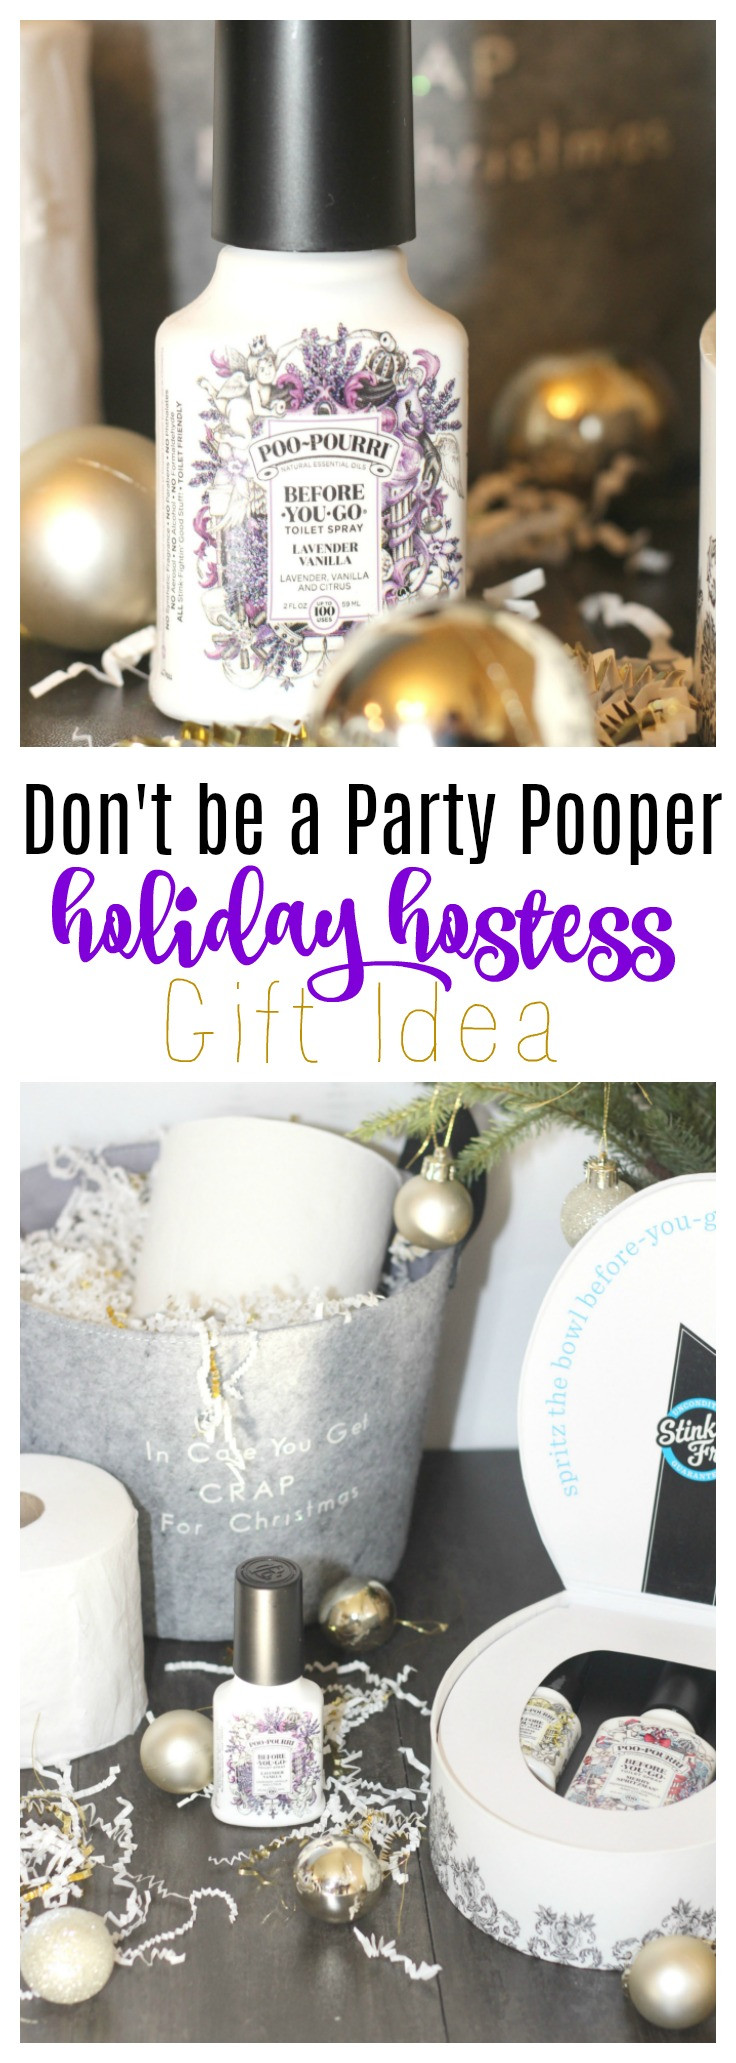 Holiday Party Hostess Gift Ideas
 Don t be a Party Pooper Holiday Hostess Gift Idea